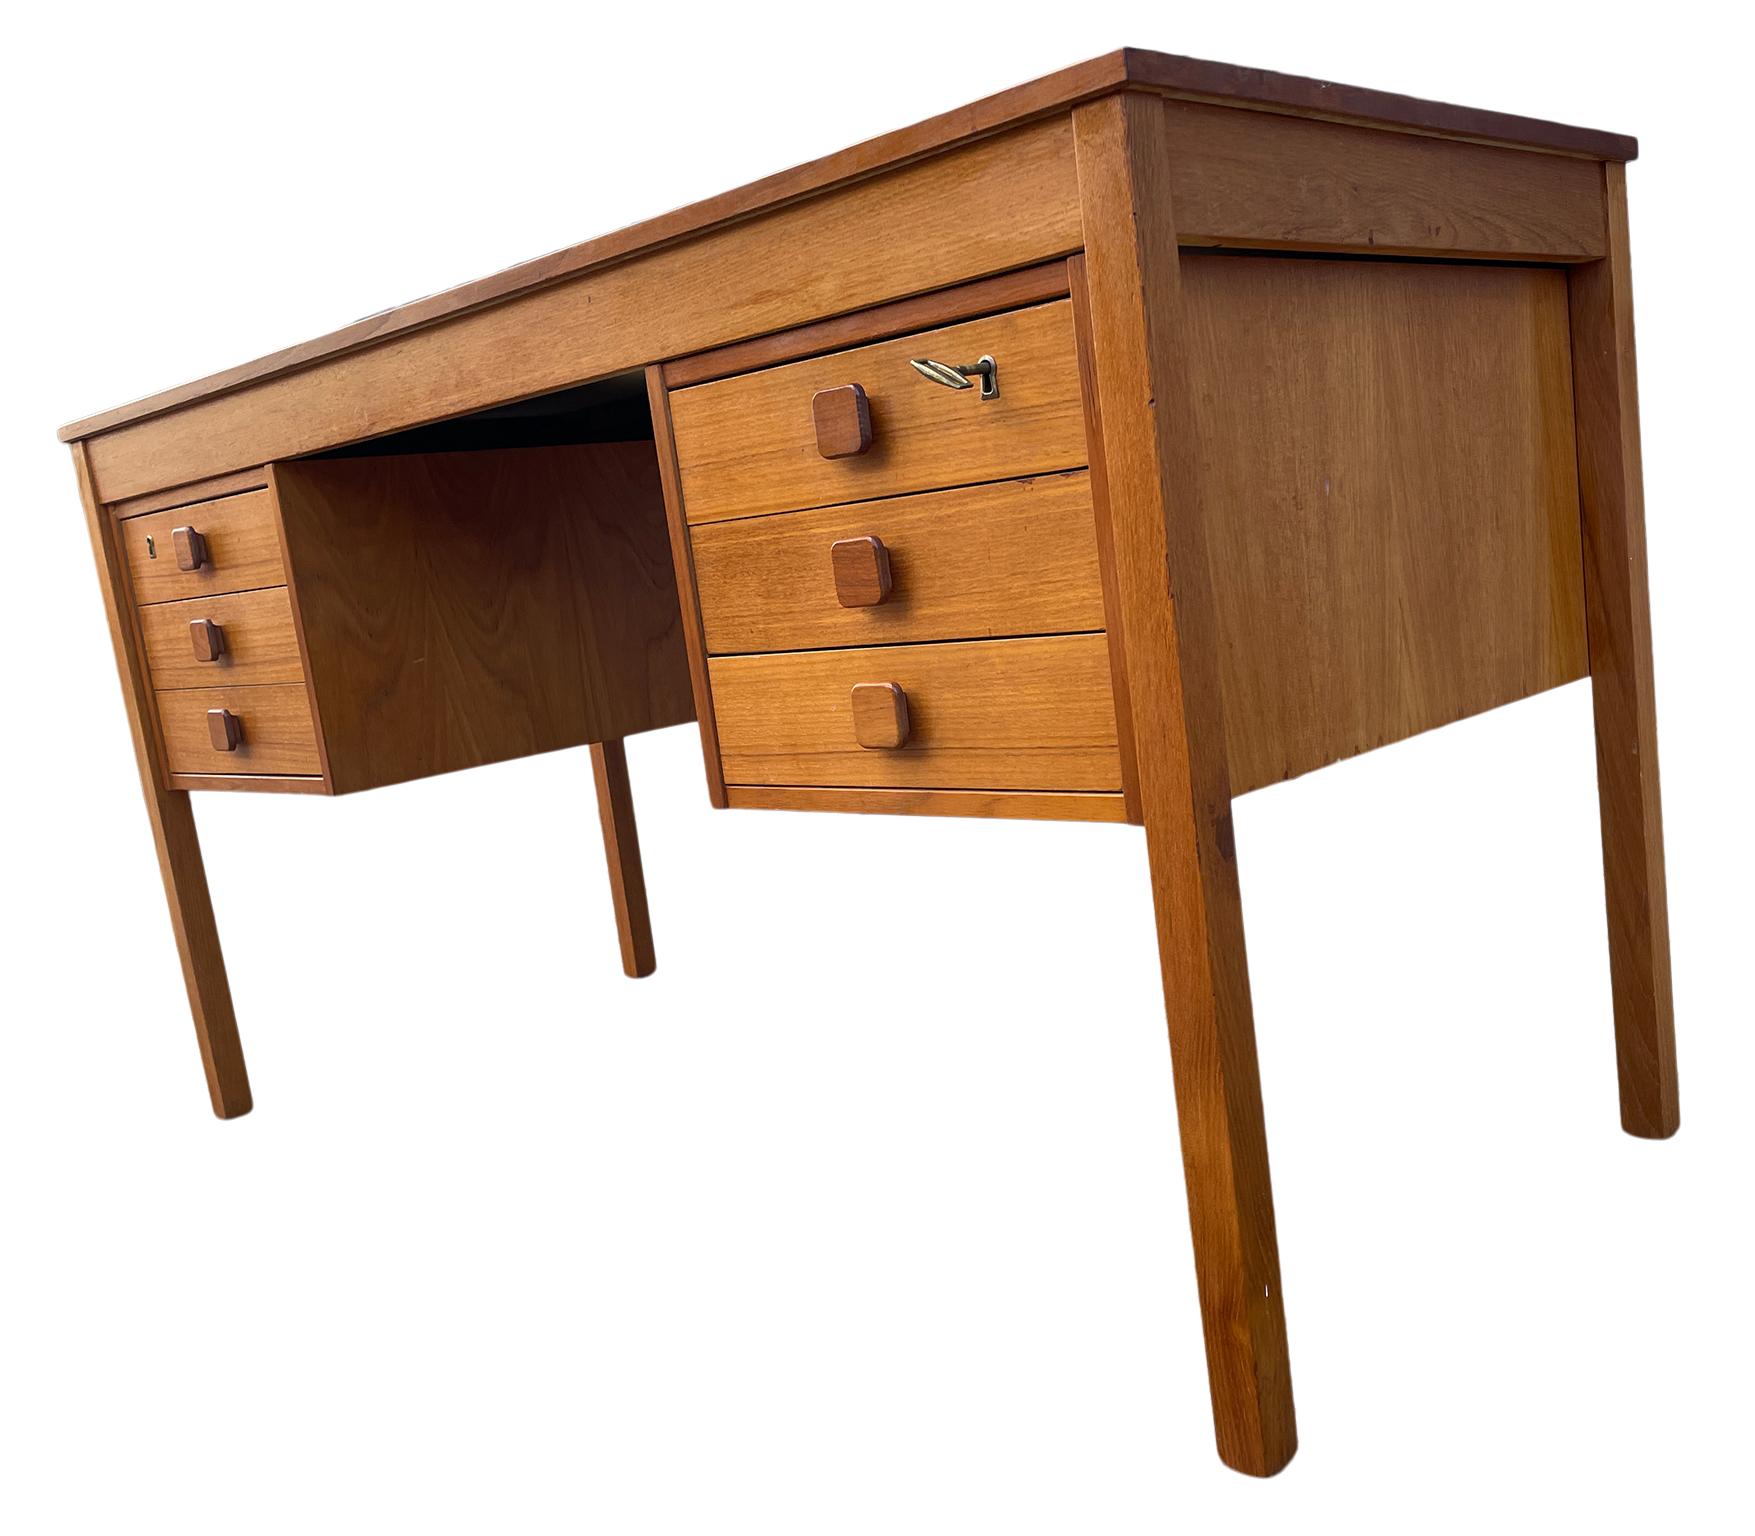 Midcentury Danish Modern Light Teak Desk 6 Drawers Top Lockable Drawers Key In Good Condition For Sale In BROOKLYN, NY